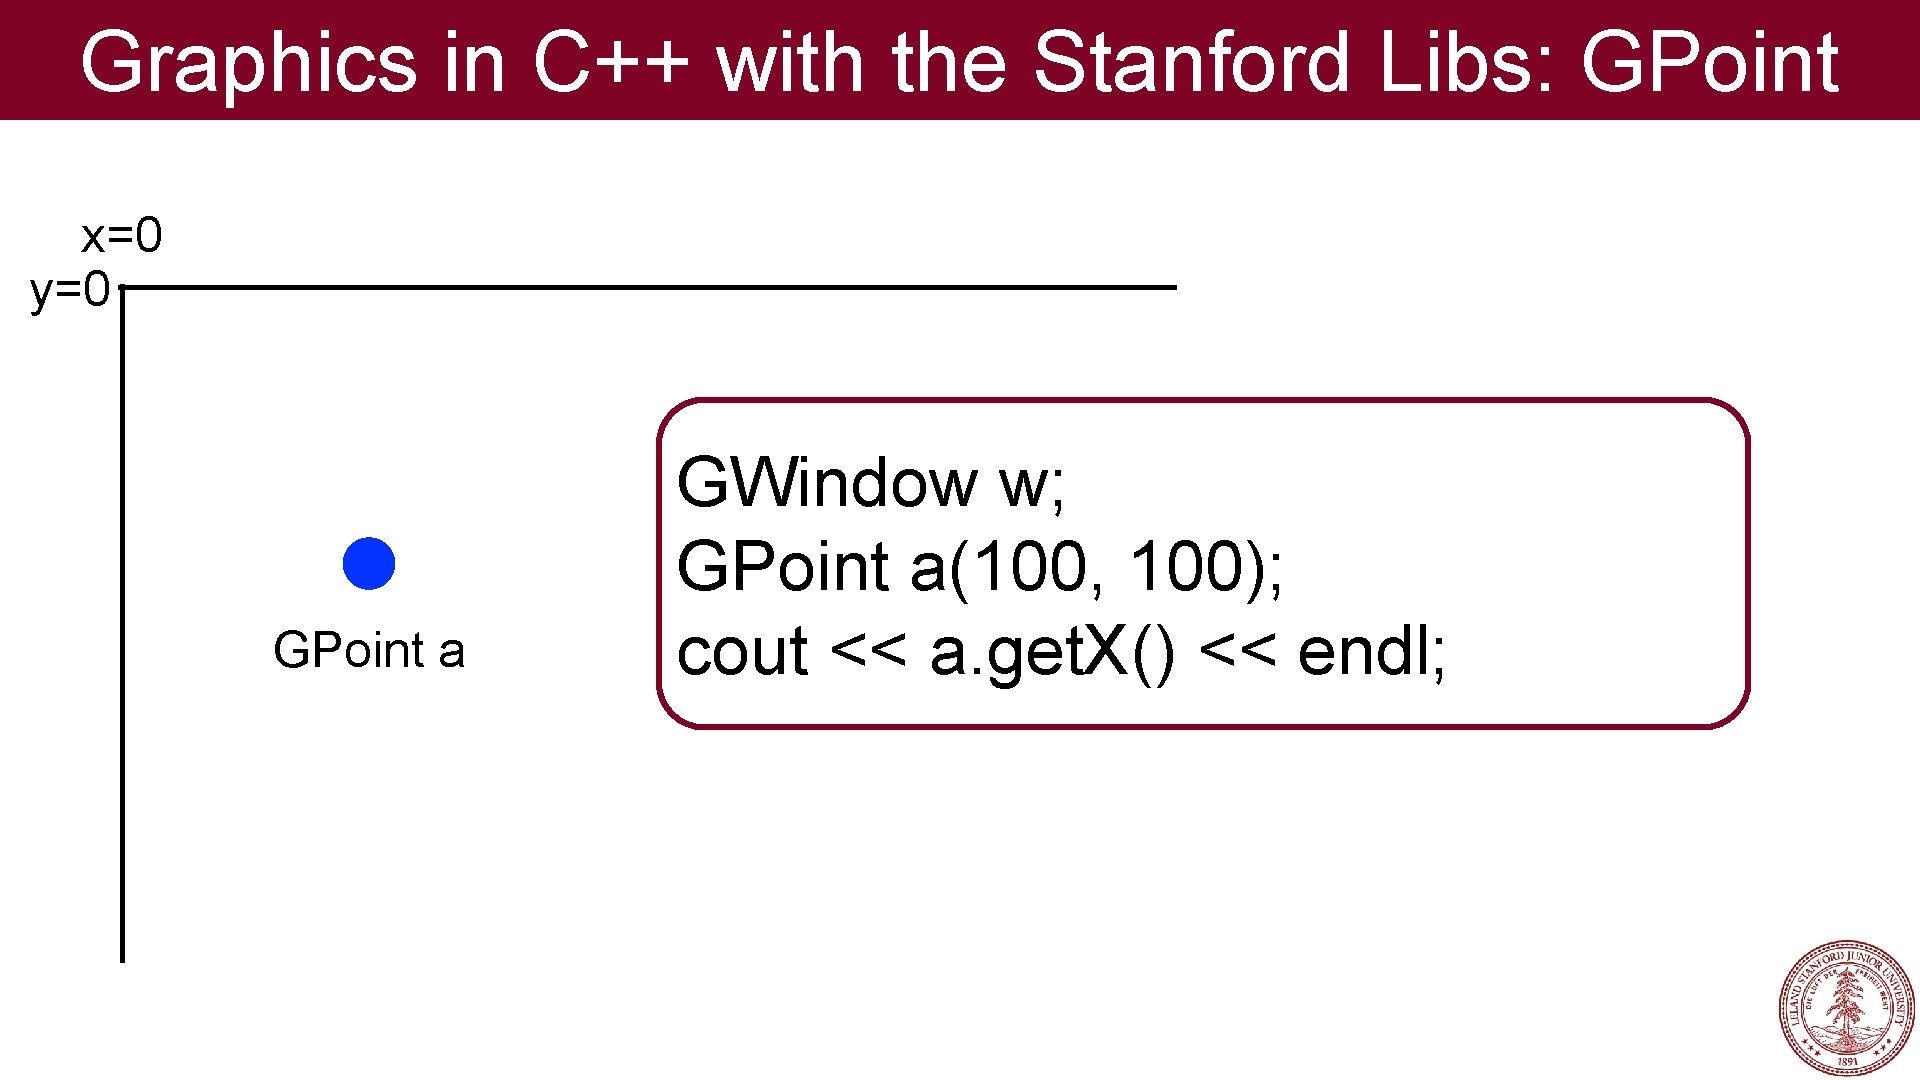 Graphics in C++ with the Stanford Libs: GPoint x=0 y=0 GPoint a GWindow w;